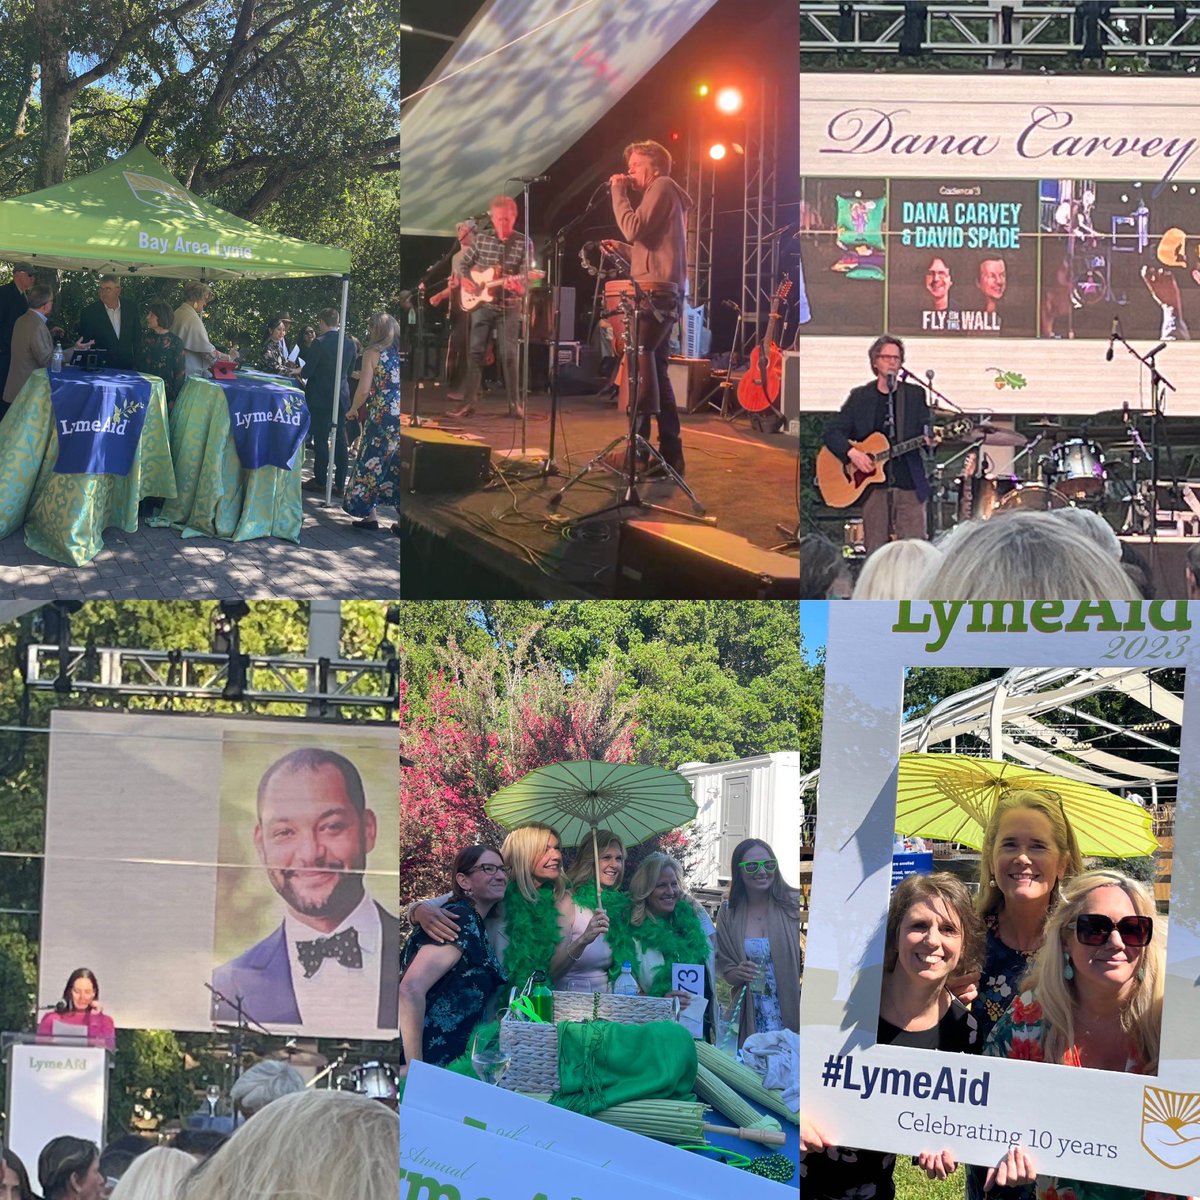 #LymeAid! 💚What an amazing event to be a part of to support patients, clinicians, & researchers. Honored to work with @bayarealyme & help further the mission of making #LymeDisease easy to diagnose and simple to cure. #Lymediseaseawarenessmonth #Tickbornediseases